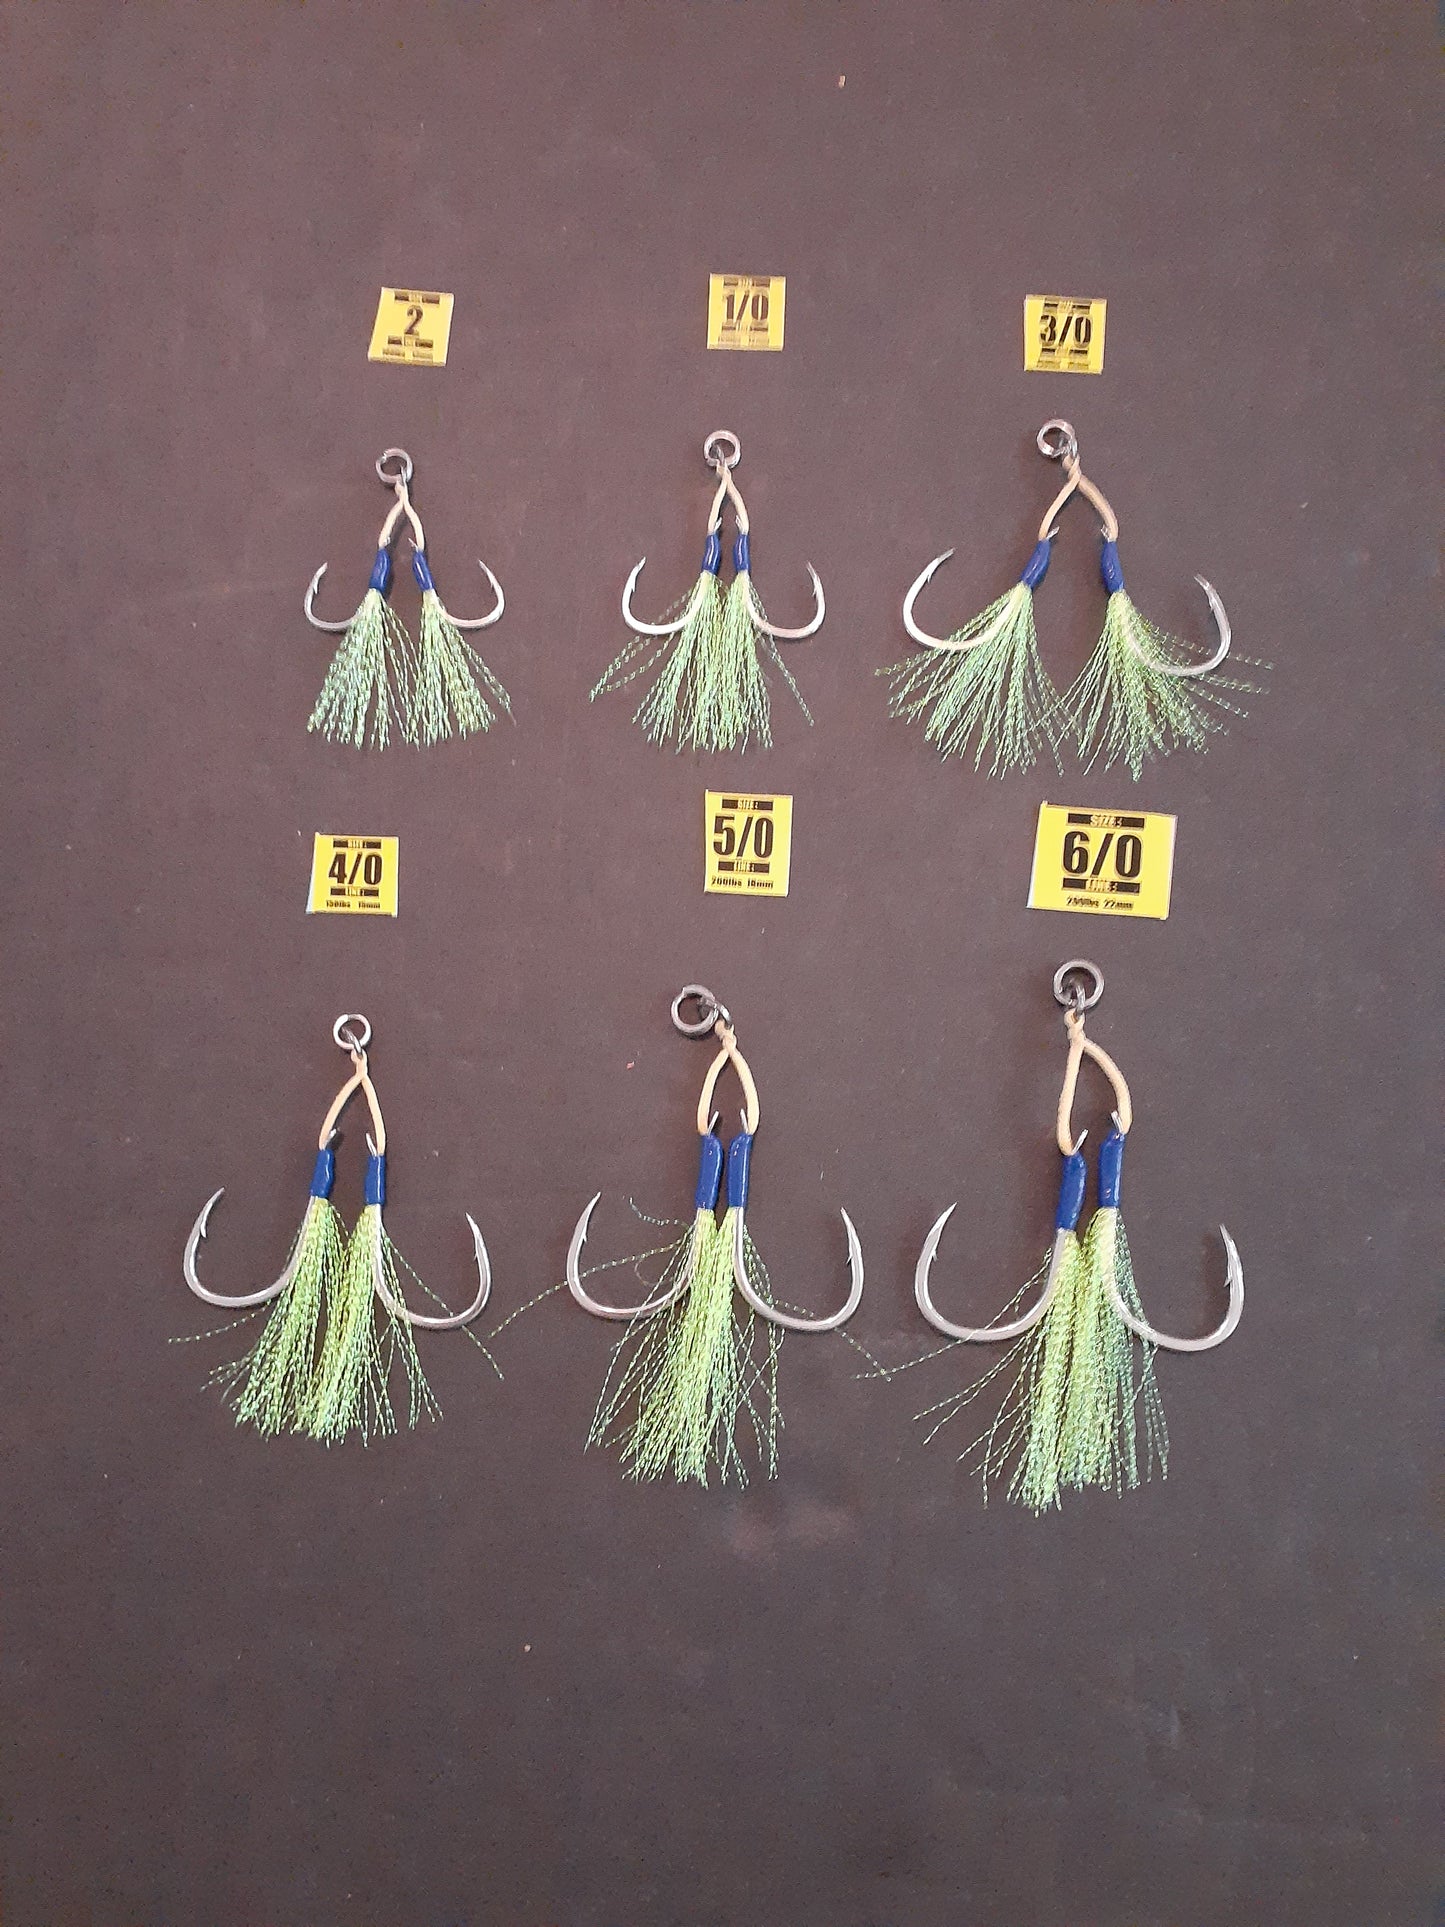 Gold Twin Assist Hooks Sizes 3/0, 4/0, 5/0 and 6/0